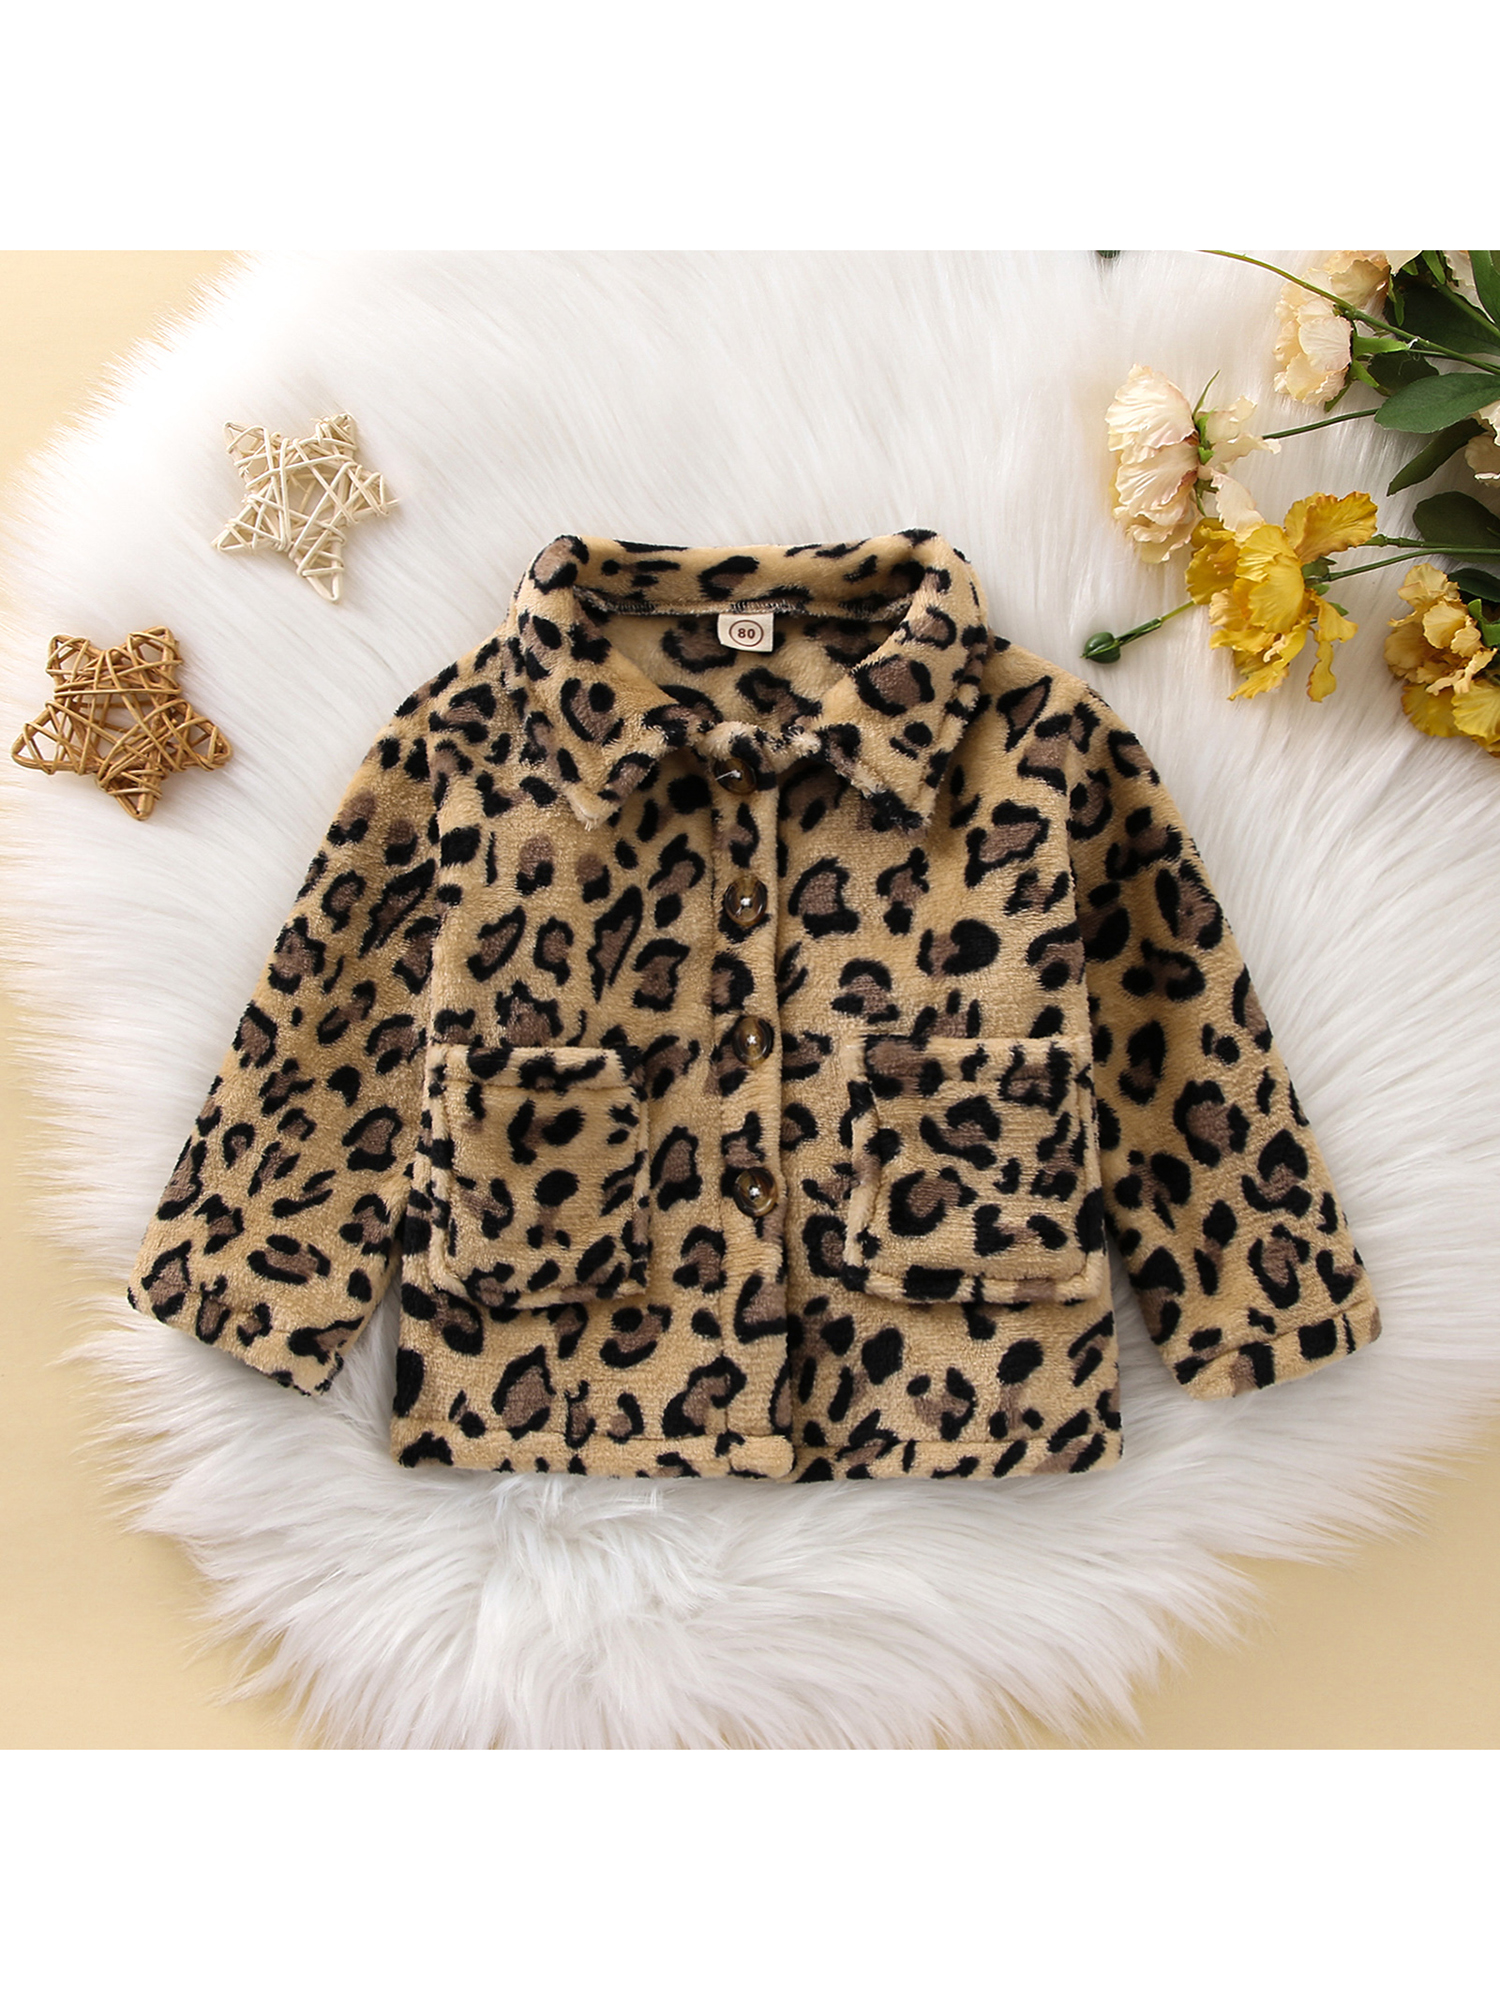 Musuos Toddler Baby Winter Jacket, Fashion Long Sleeve Leopard Print Button Down Plush Coat - image 3 of 10